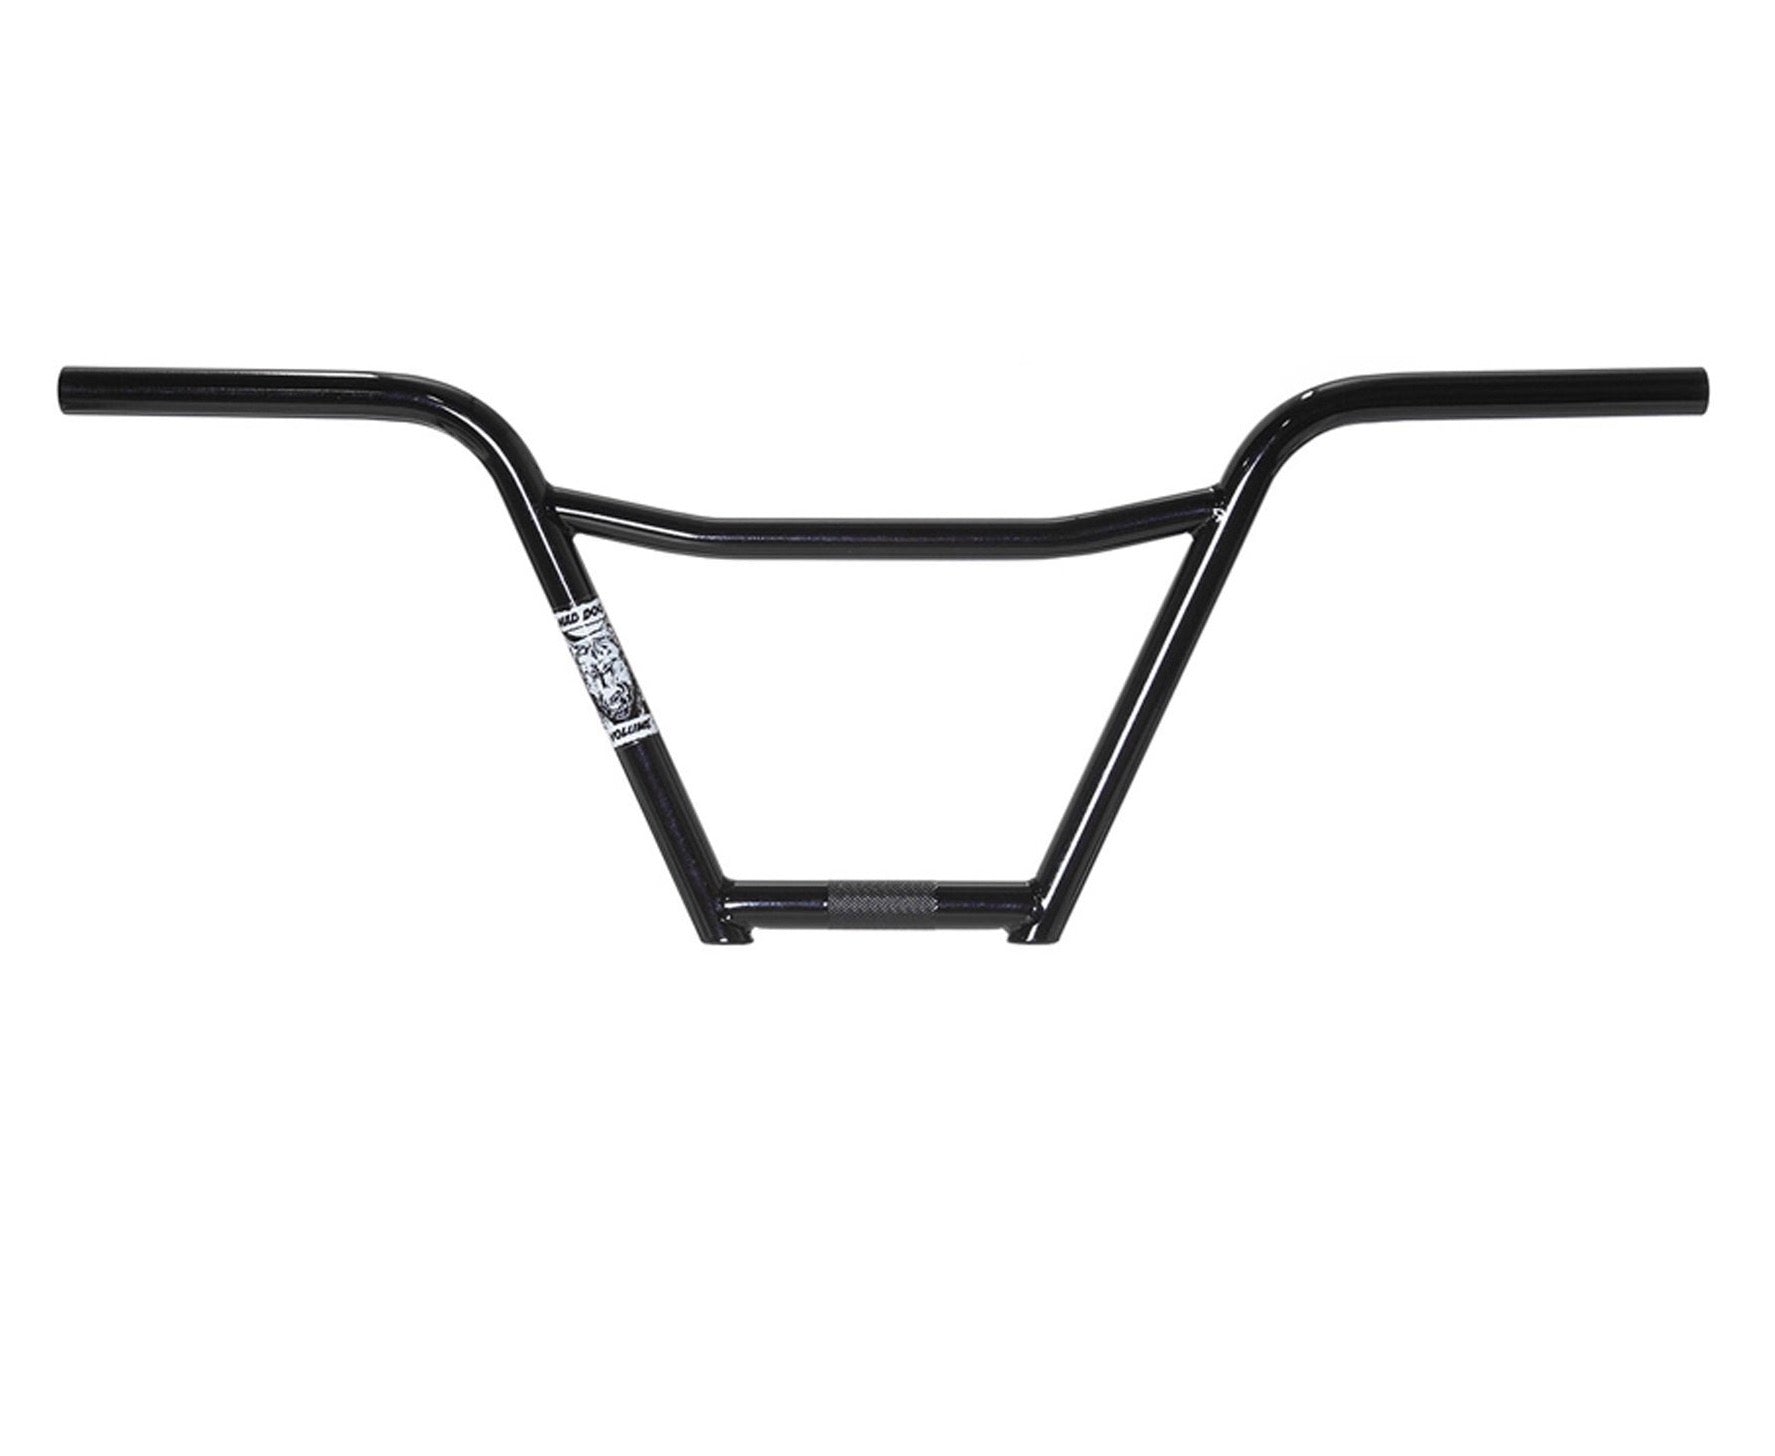 Front view of the Volume Mad Dog bars in black